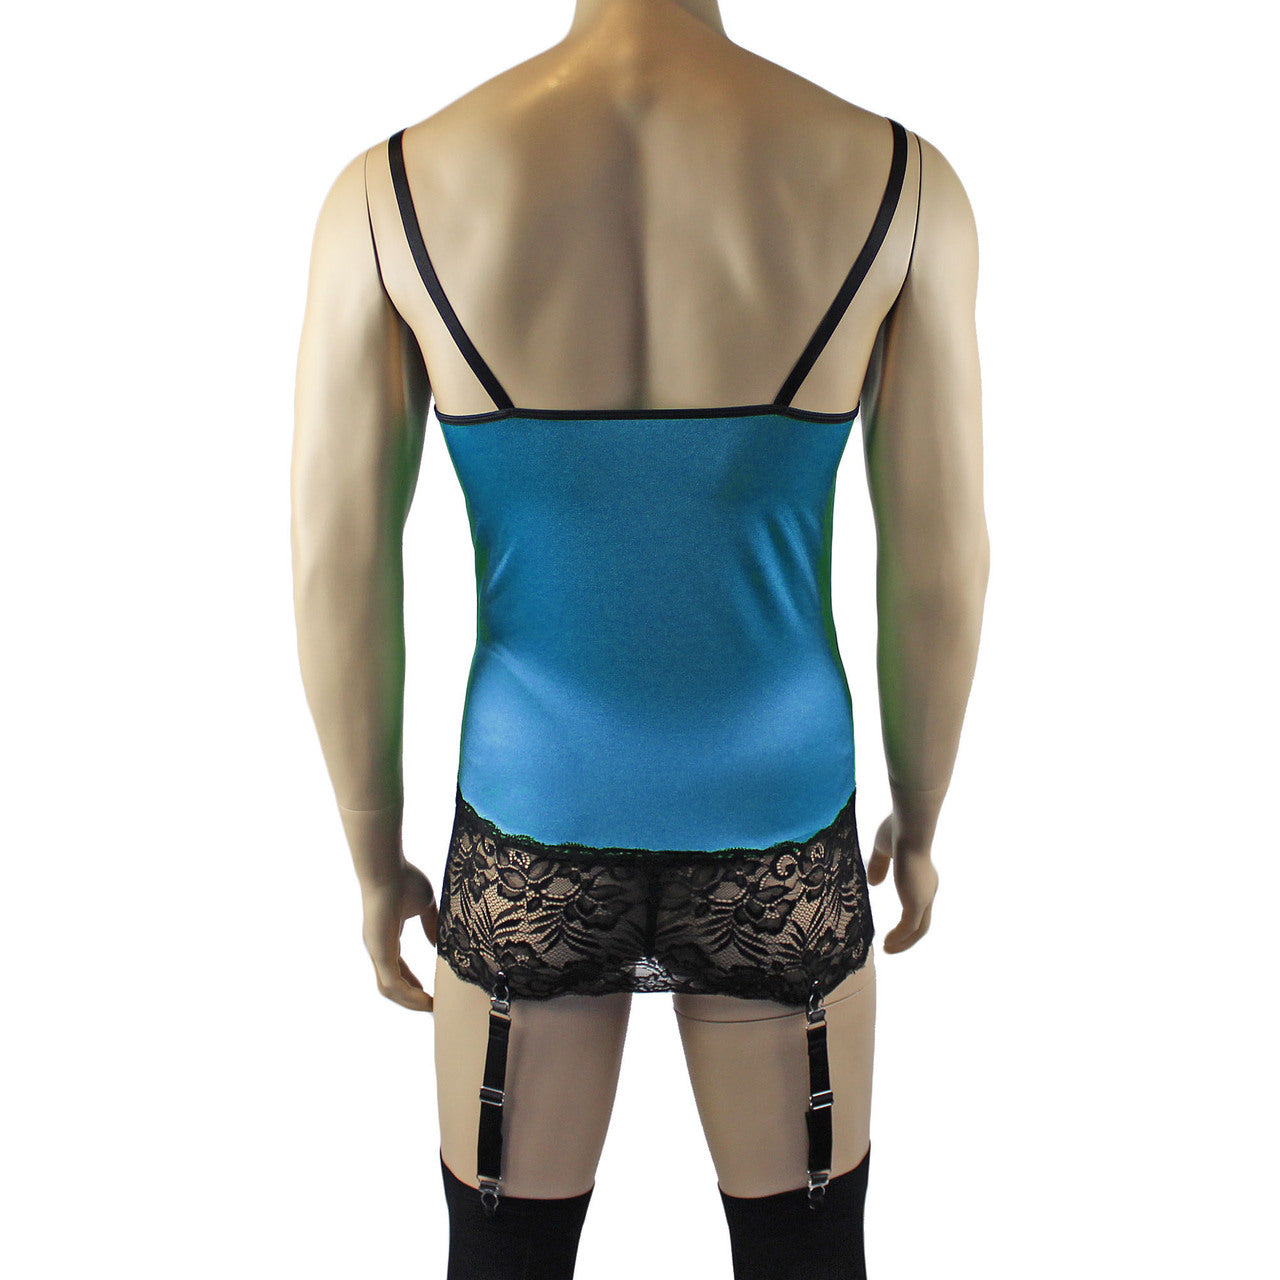 Mens Risque Camisole Mini Dress Chemise, G string & Stockings (teal black plus other colours)